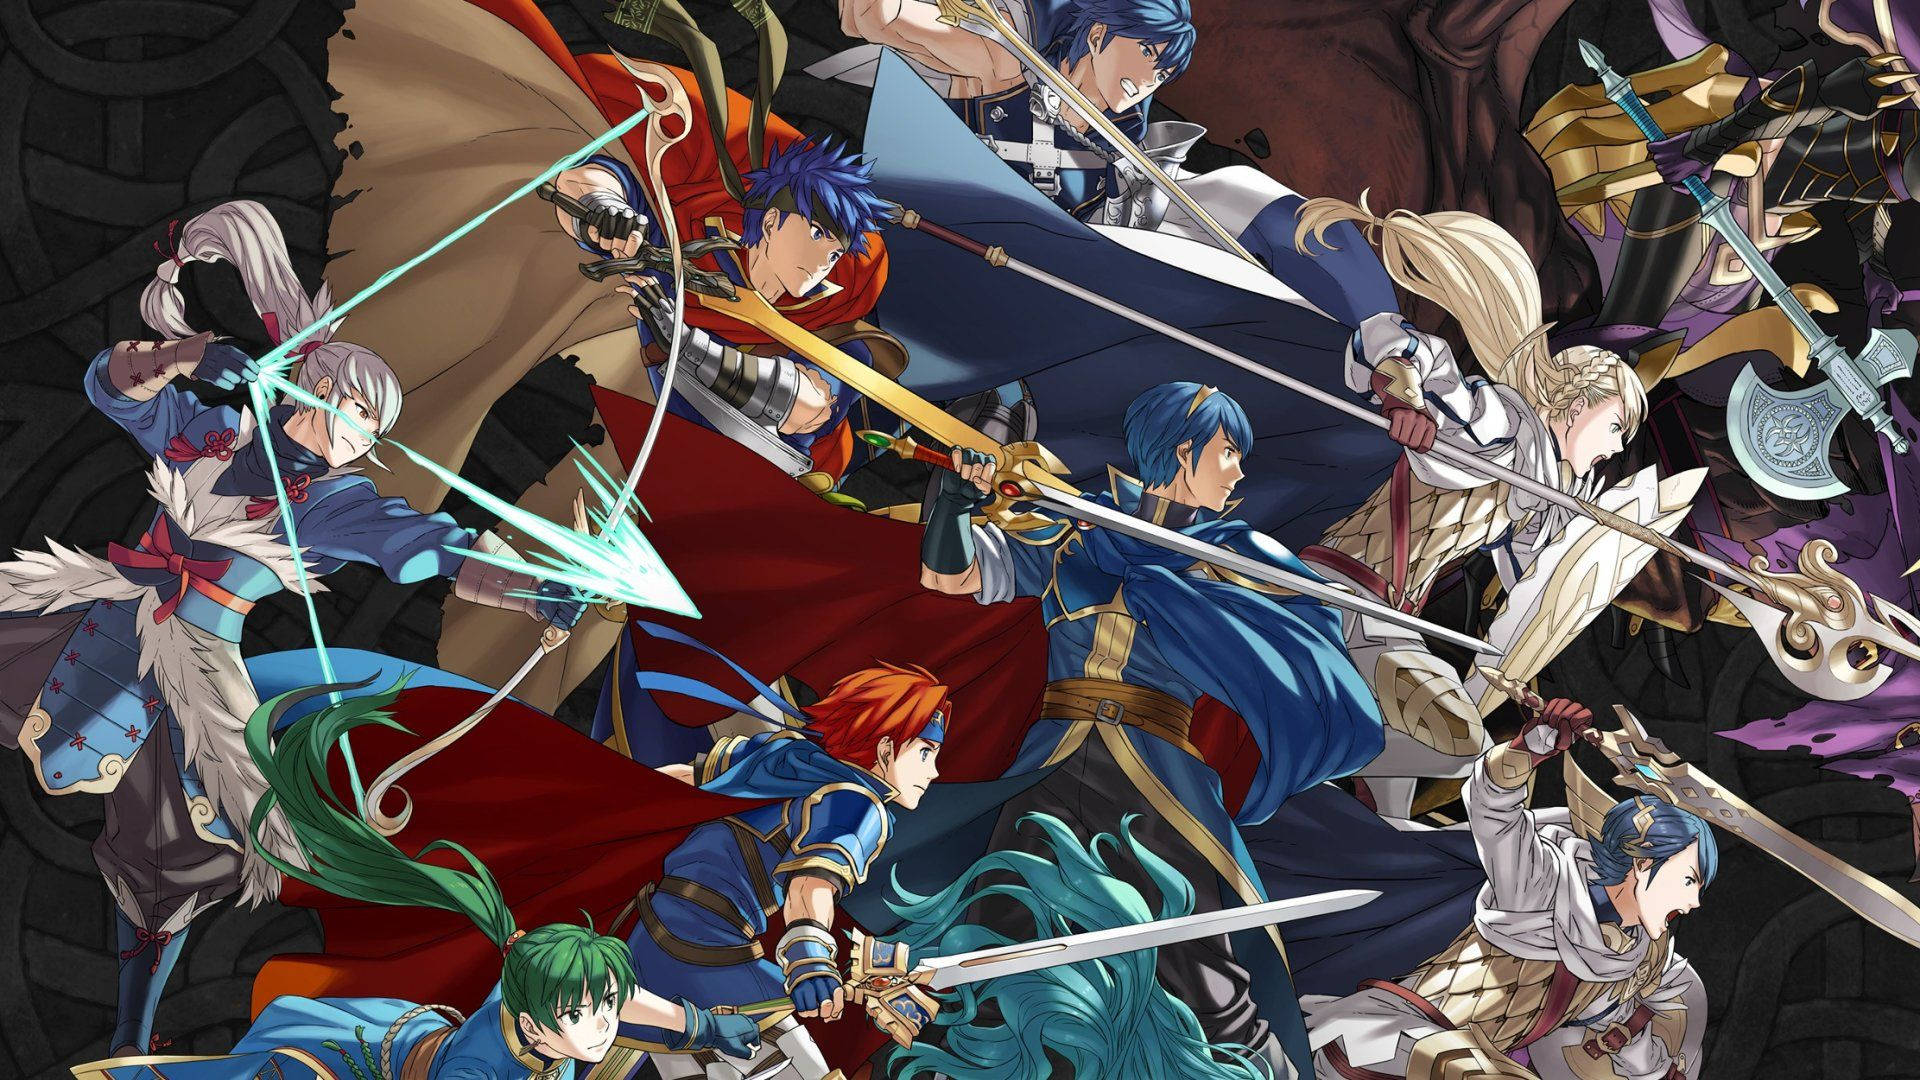 Heroes of the Order of Heroes from Fire Emblem ready for battle Wallpaper